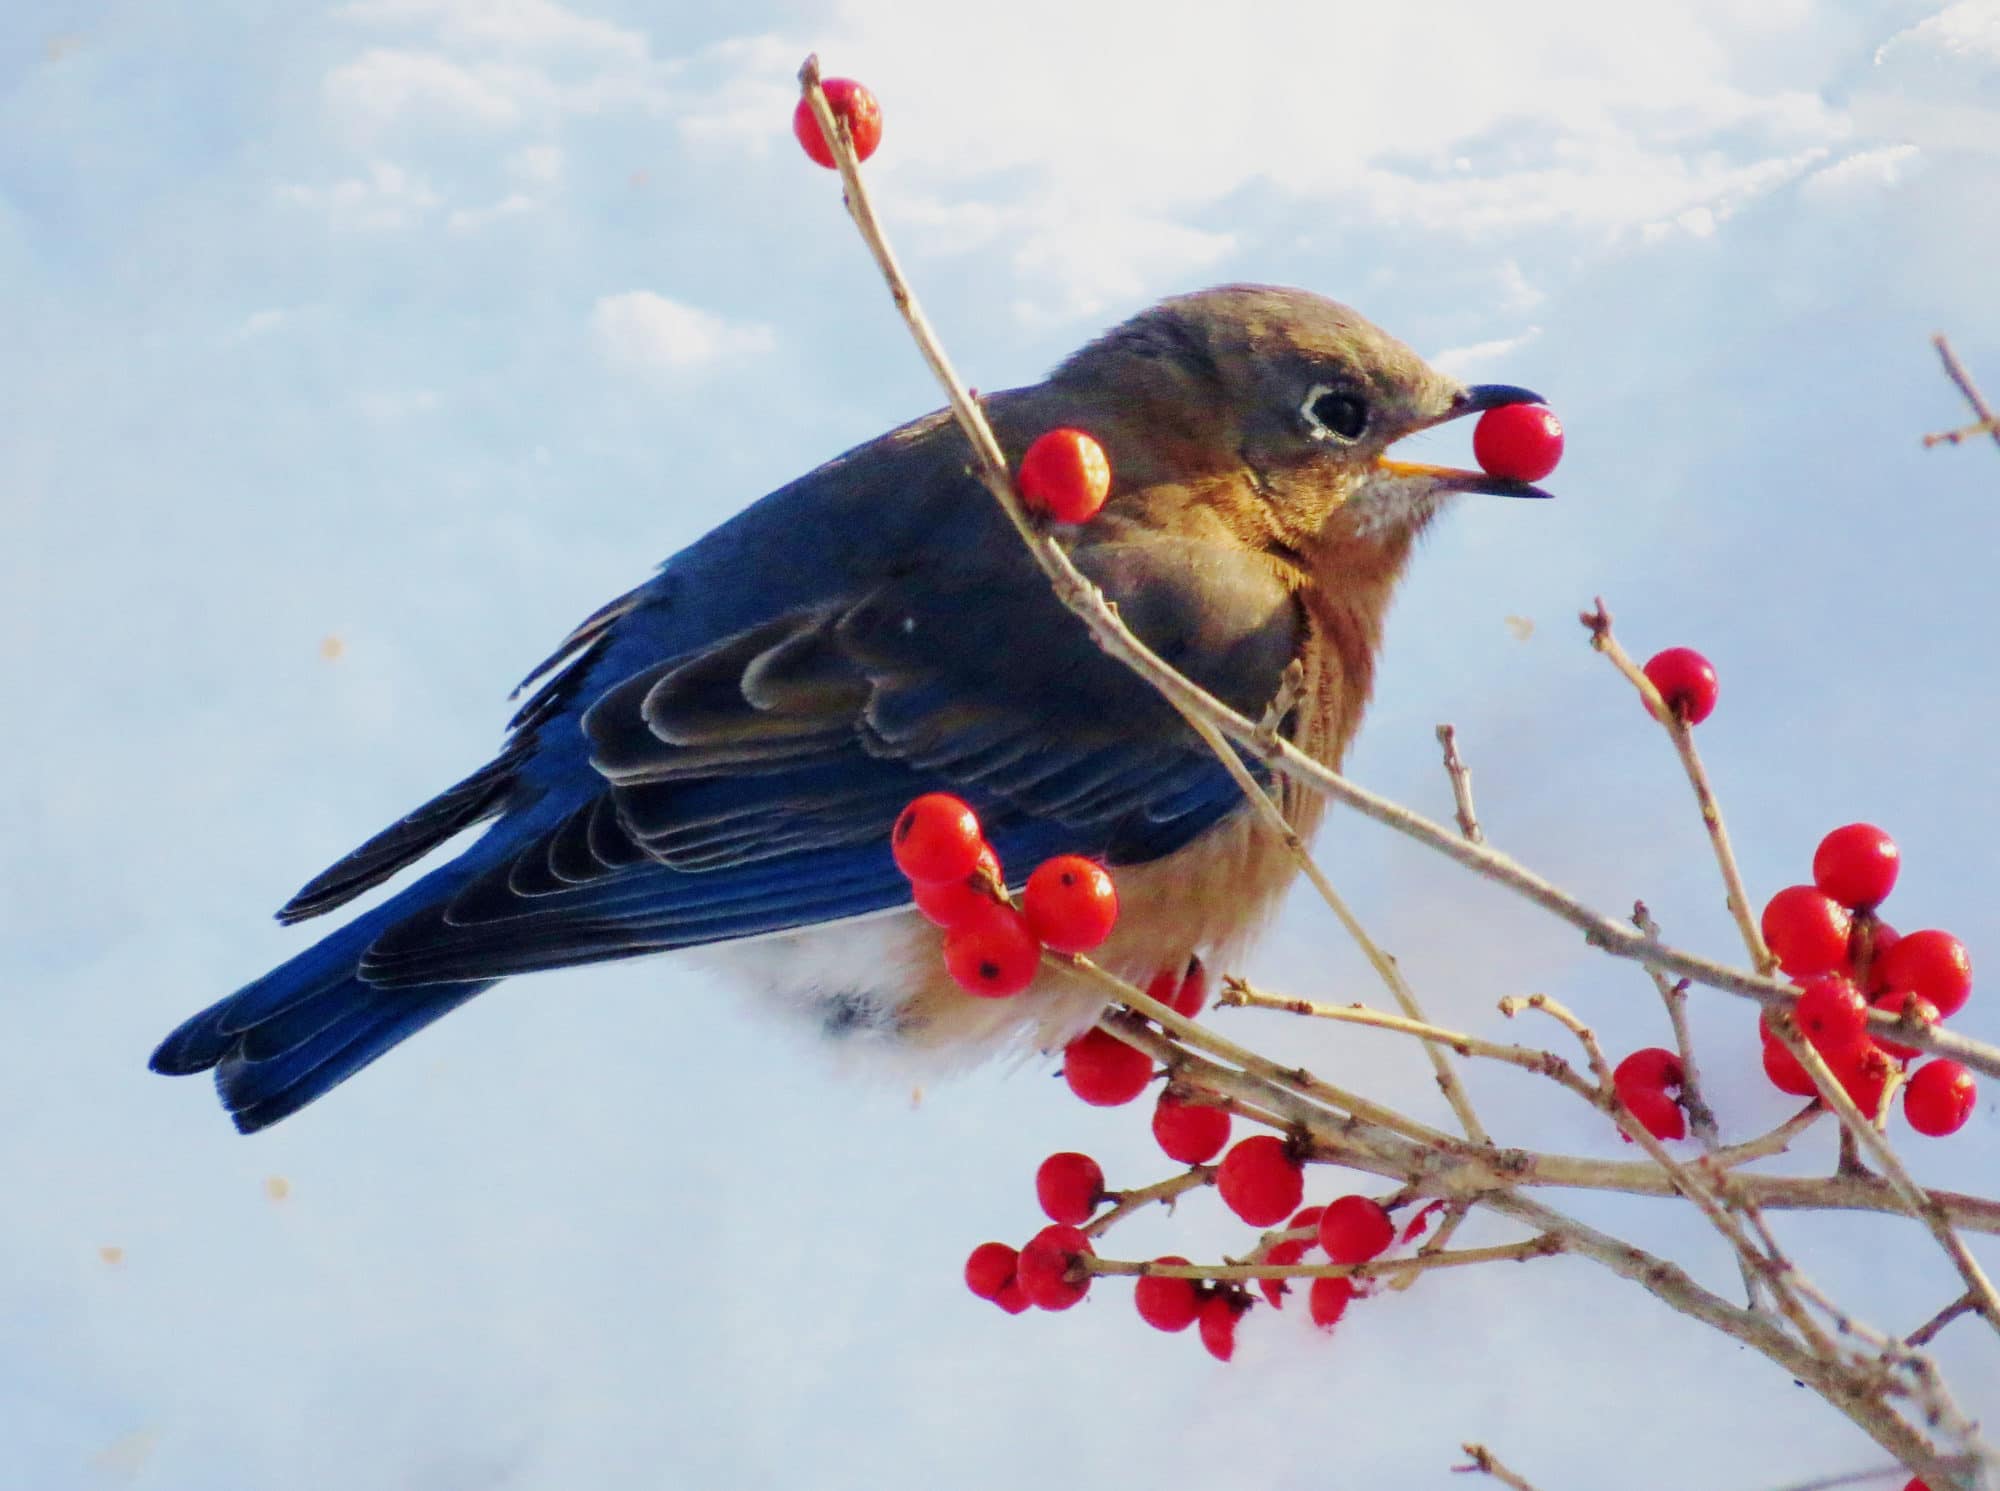 An Eastern Bluebird dines on winterberry holly. (photo © Meade Cadot)